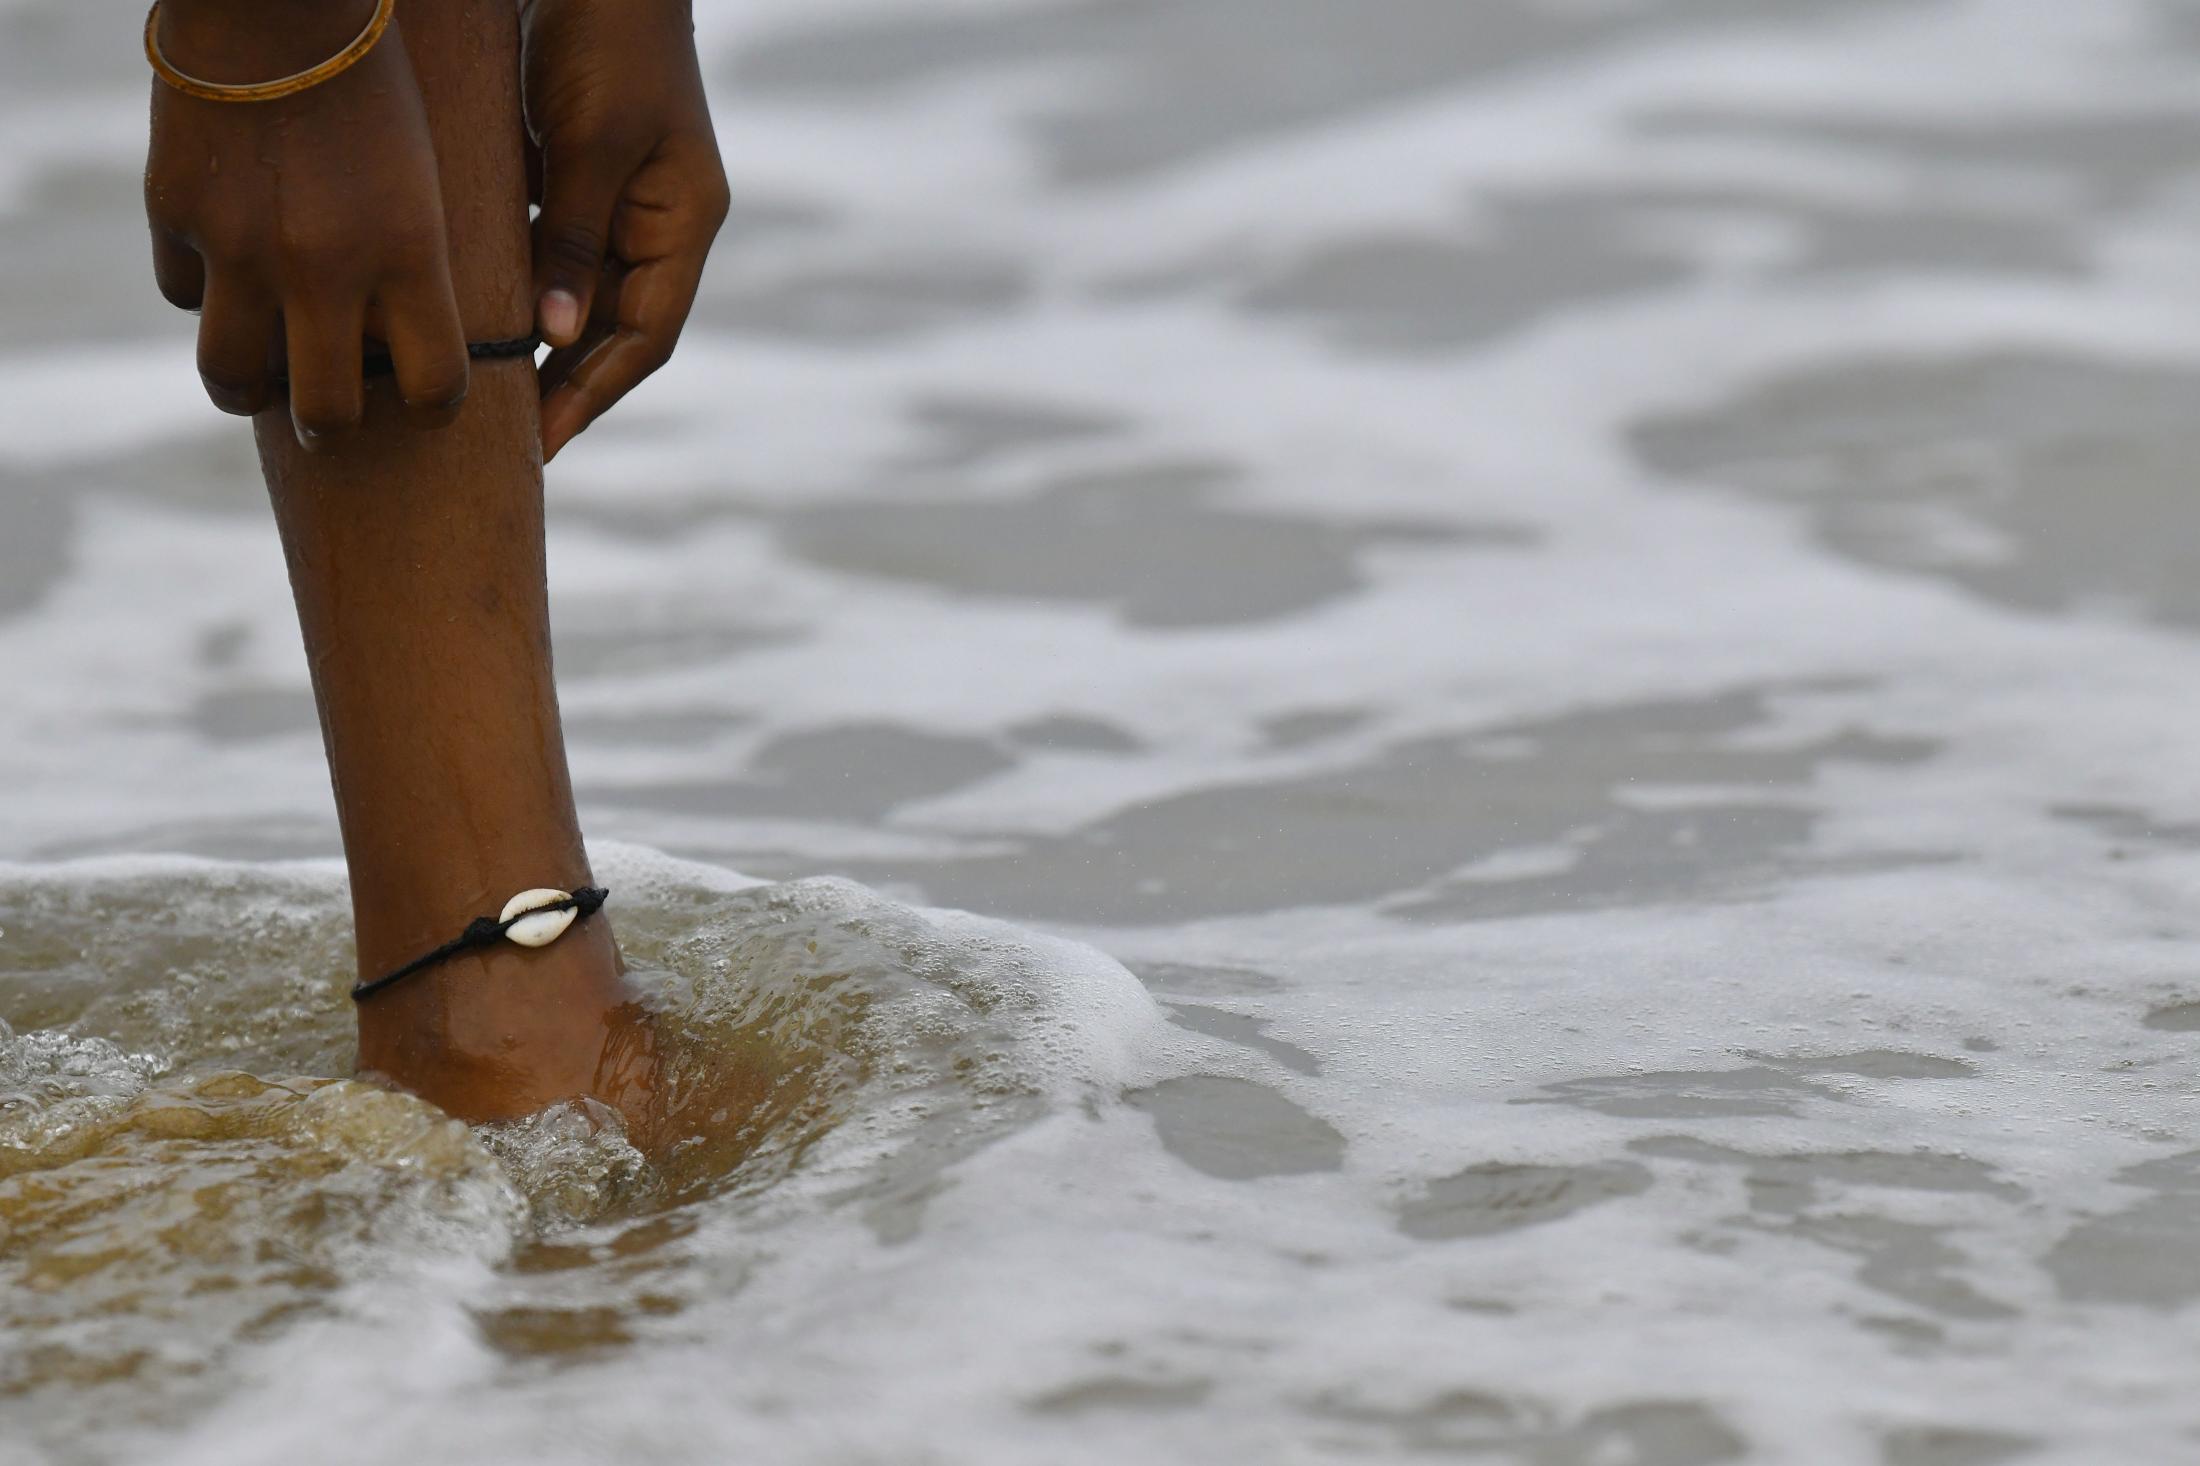 Kamali pulls up her trouser to show her anklet. Every surfer has a shell either around their ankle or neck. This is a sign of respect to the sea. Some also believe that this helps ward off evil eyes.